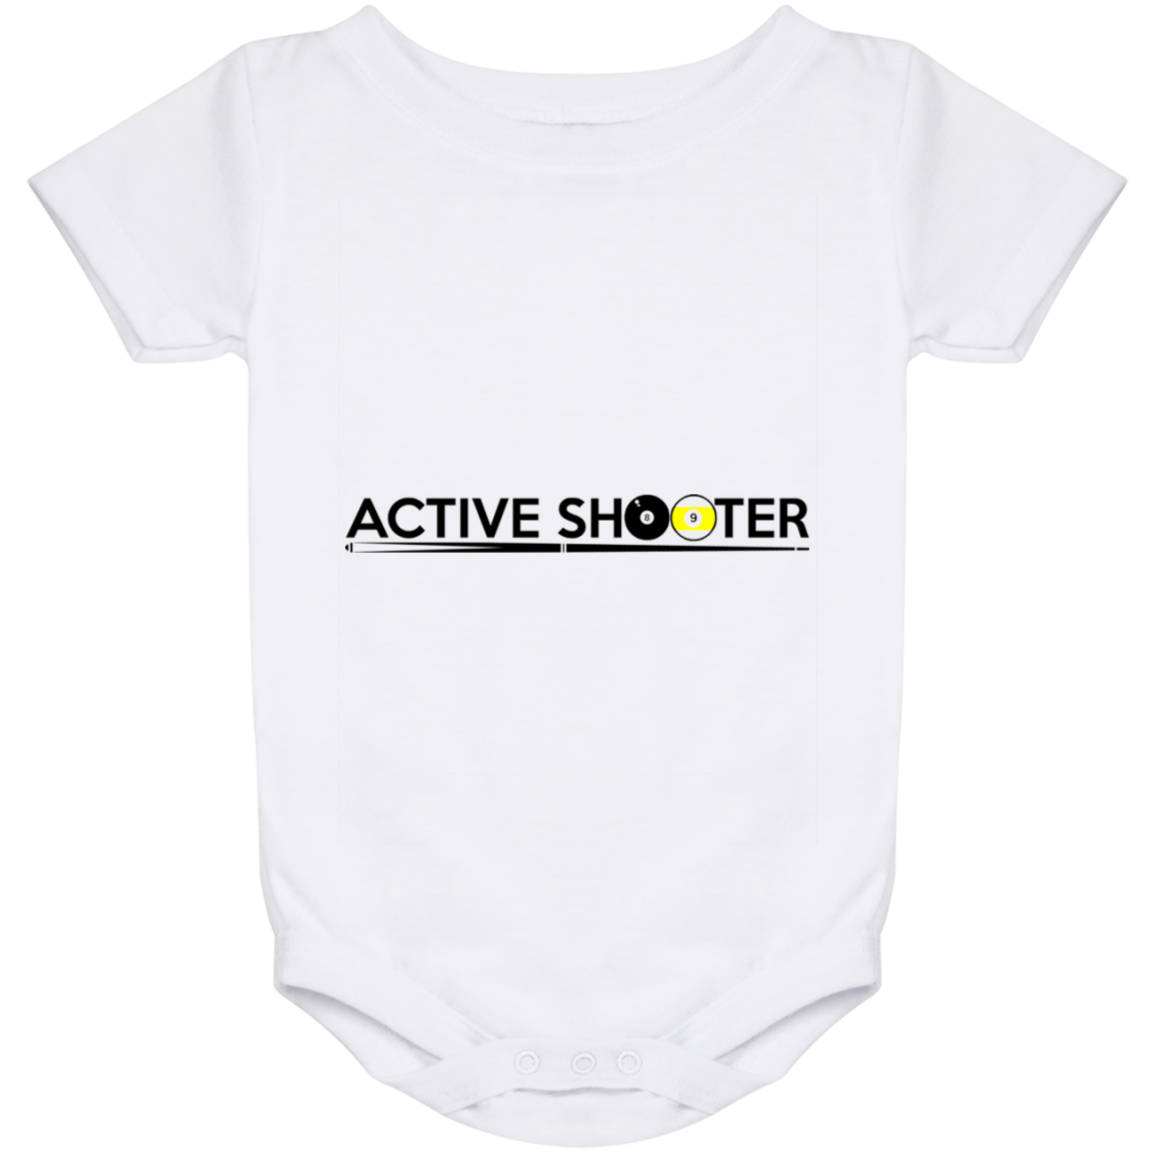 The GHOATS Custom Design #1. Active Shooter. Baby Onesie 24 Month